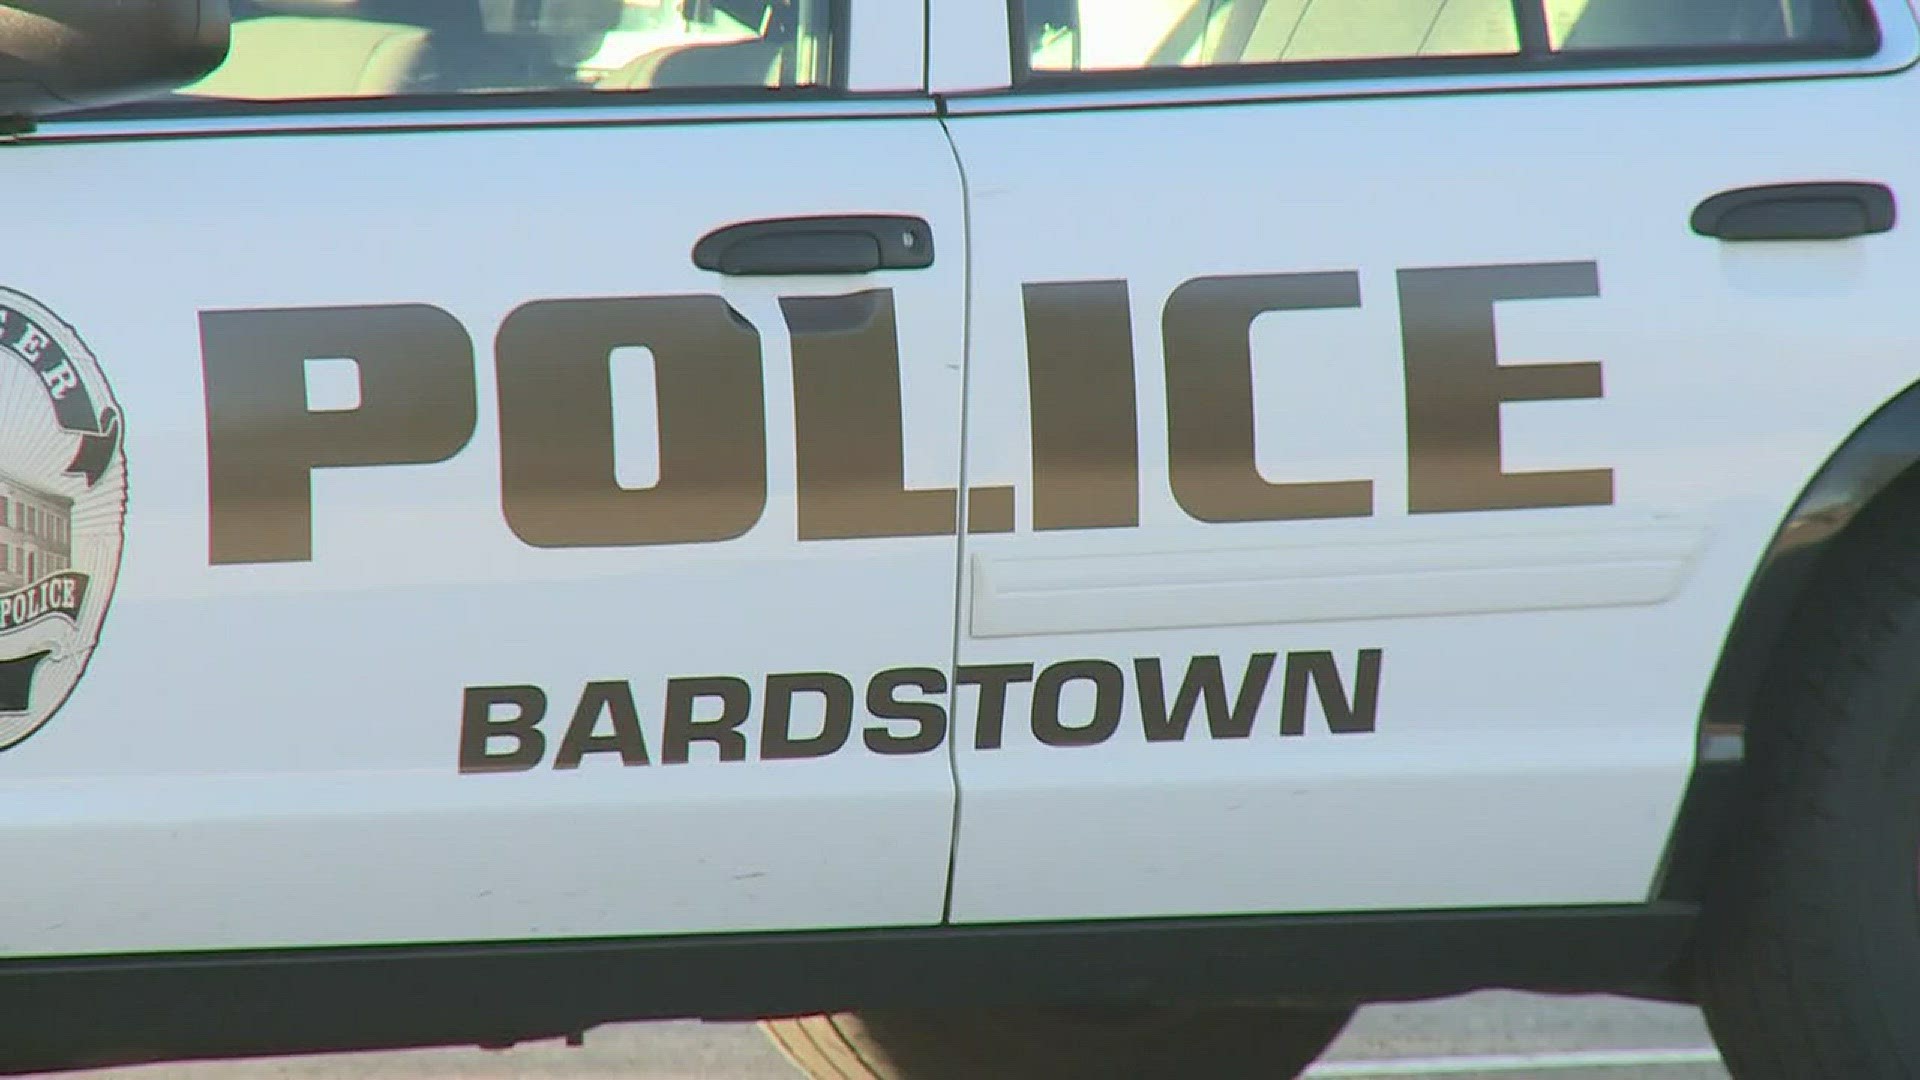 Bardstown police dept. faces another shake-up